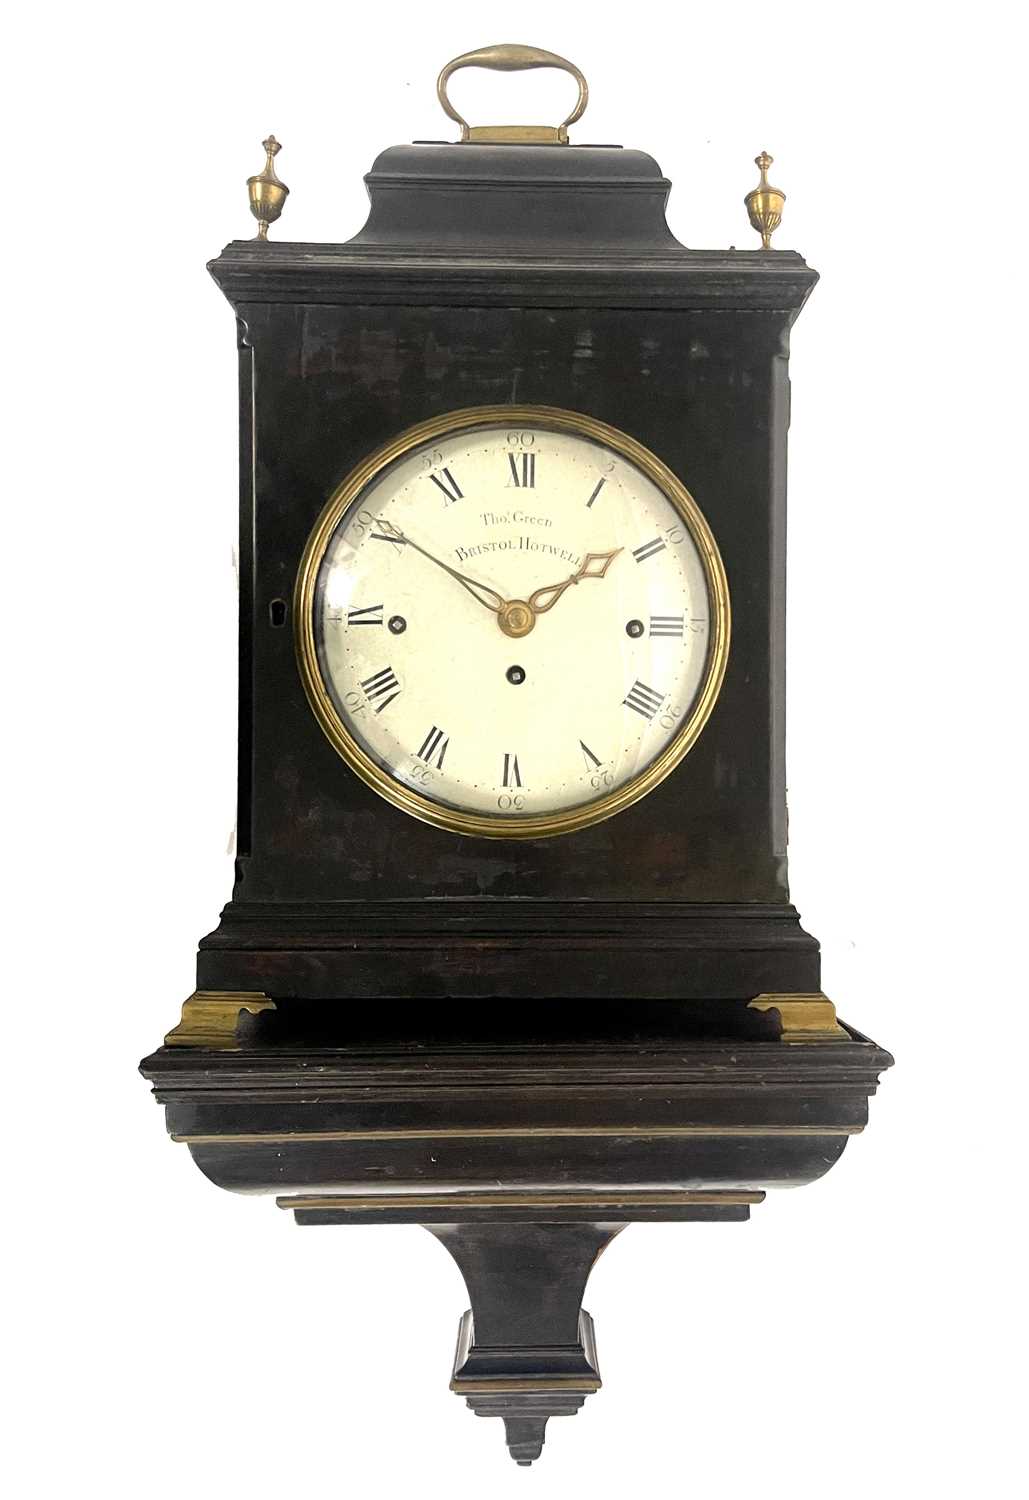 Thomas Green, Bristol Hotwell, a George III bracket clock, ebonised chamfered case, caddy top with